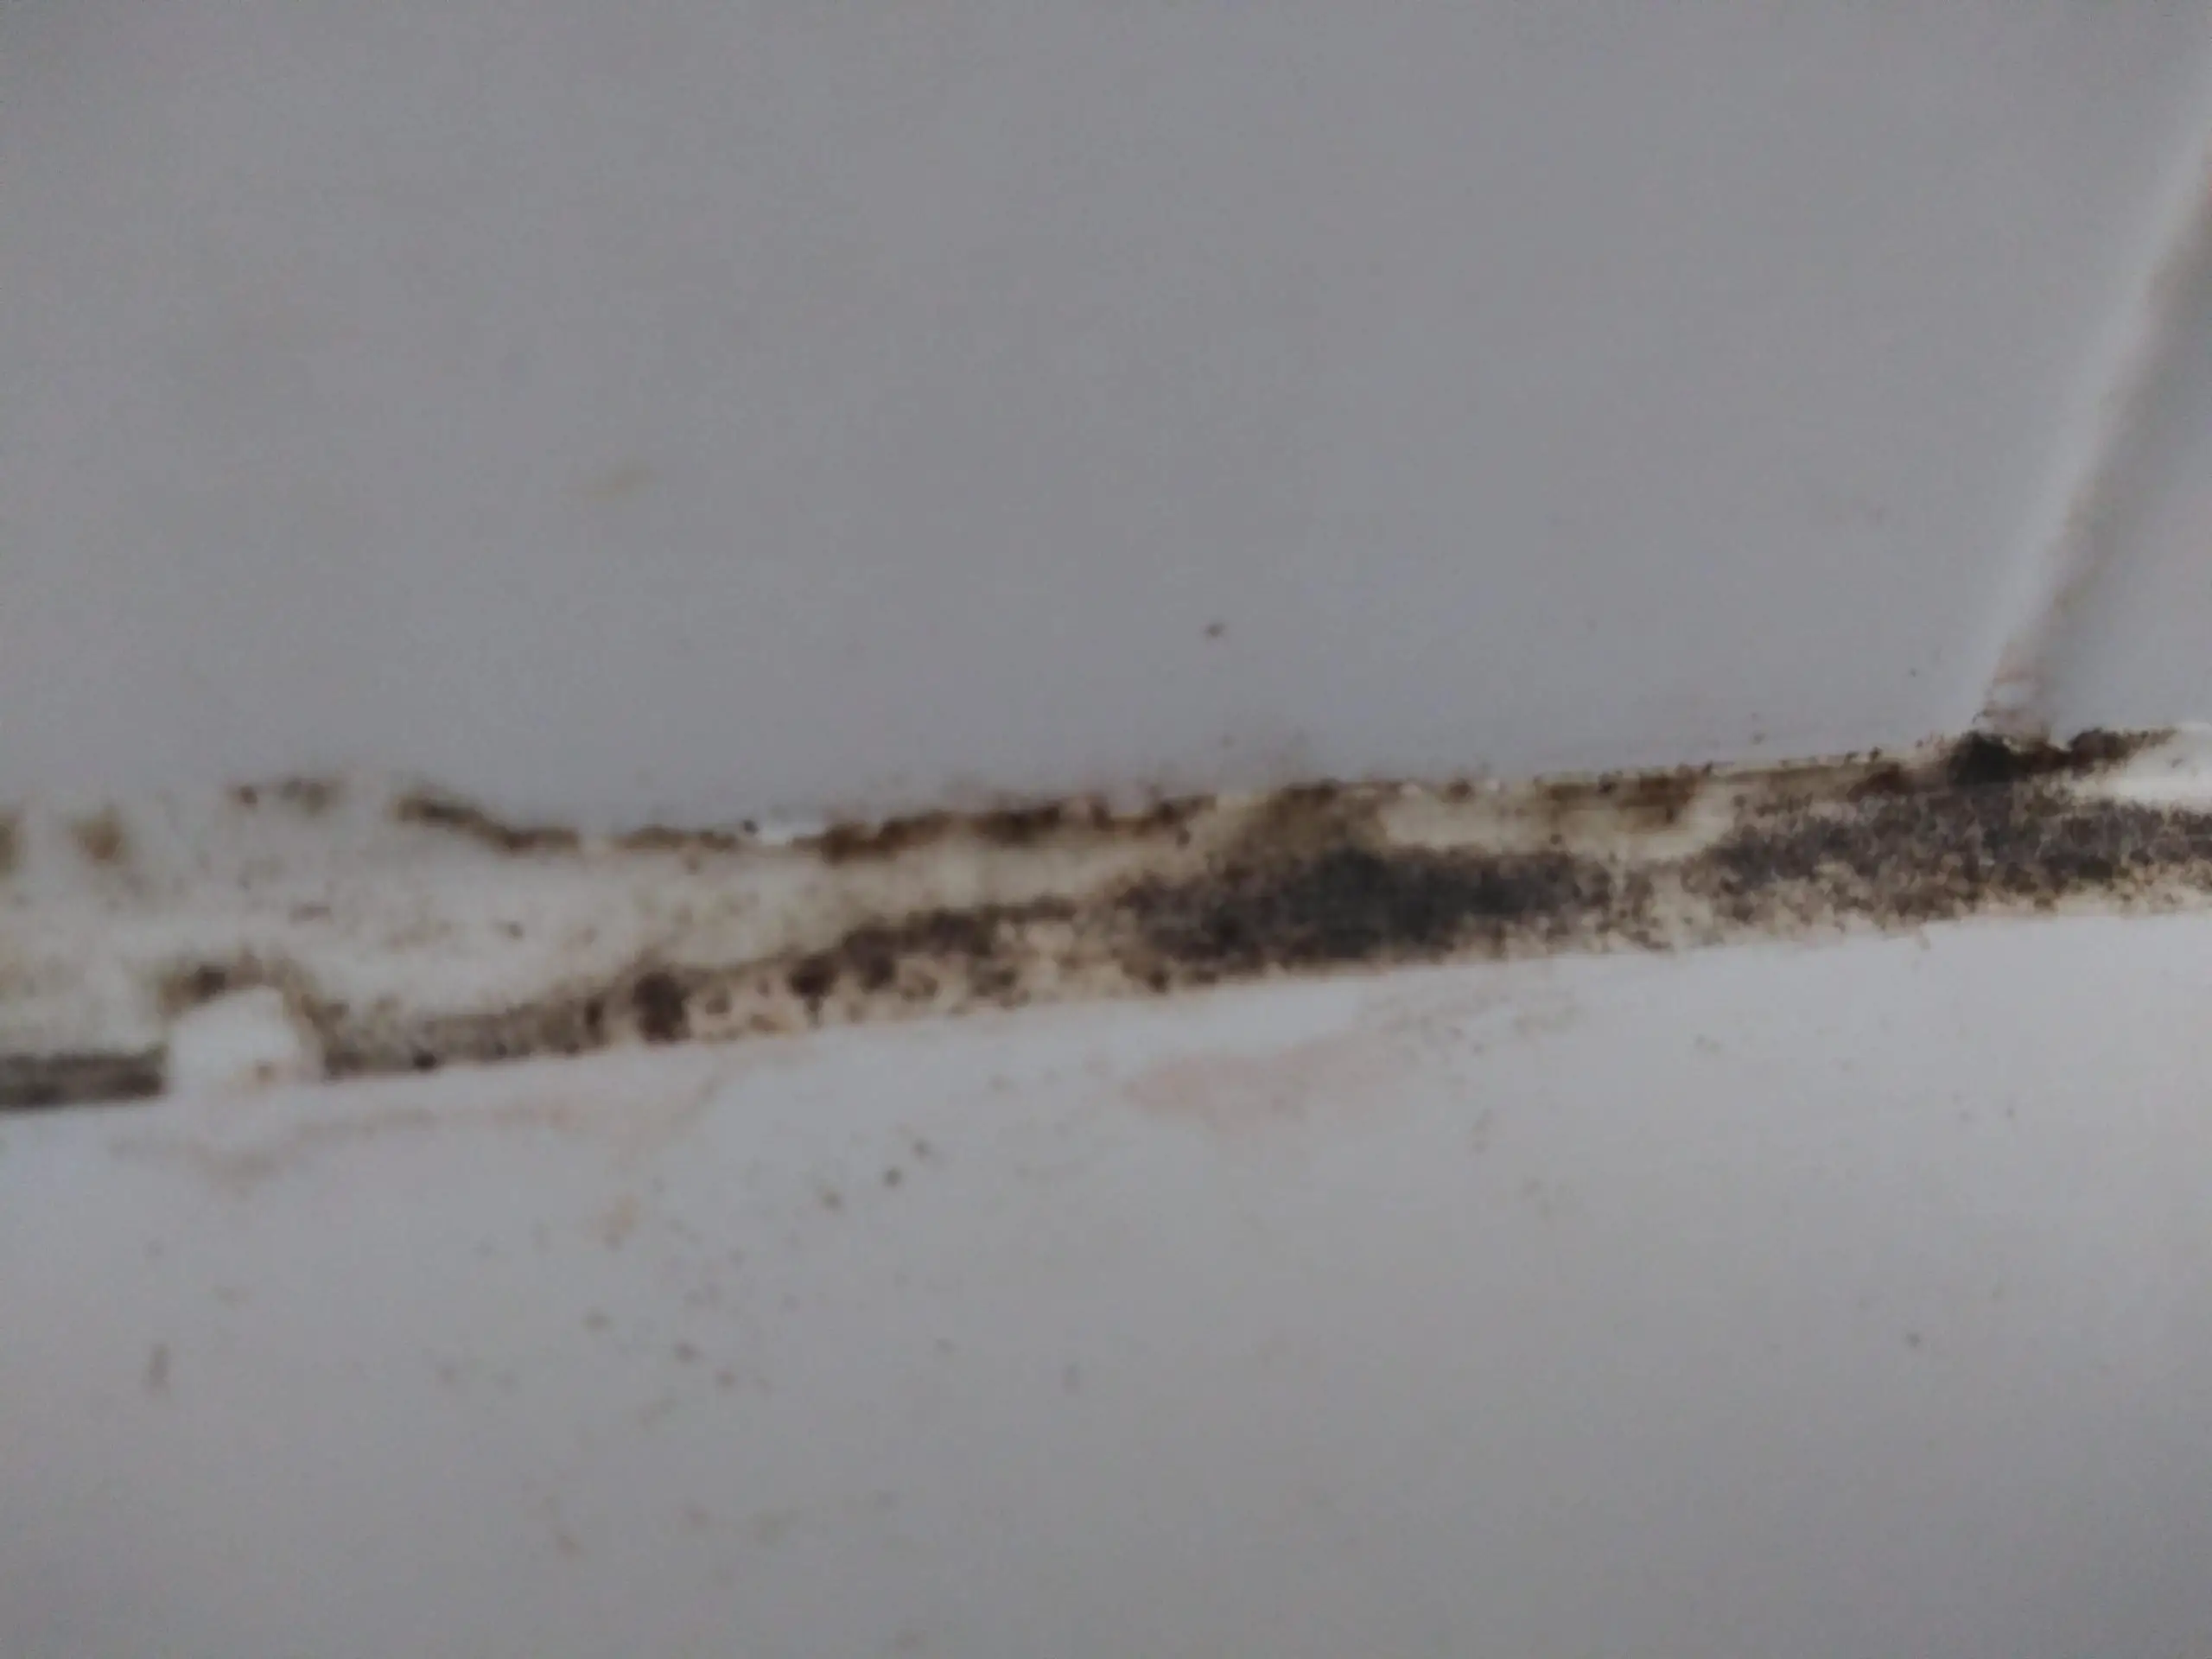 How do I clean this mold from a Bath Fitter tub ...